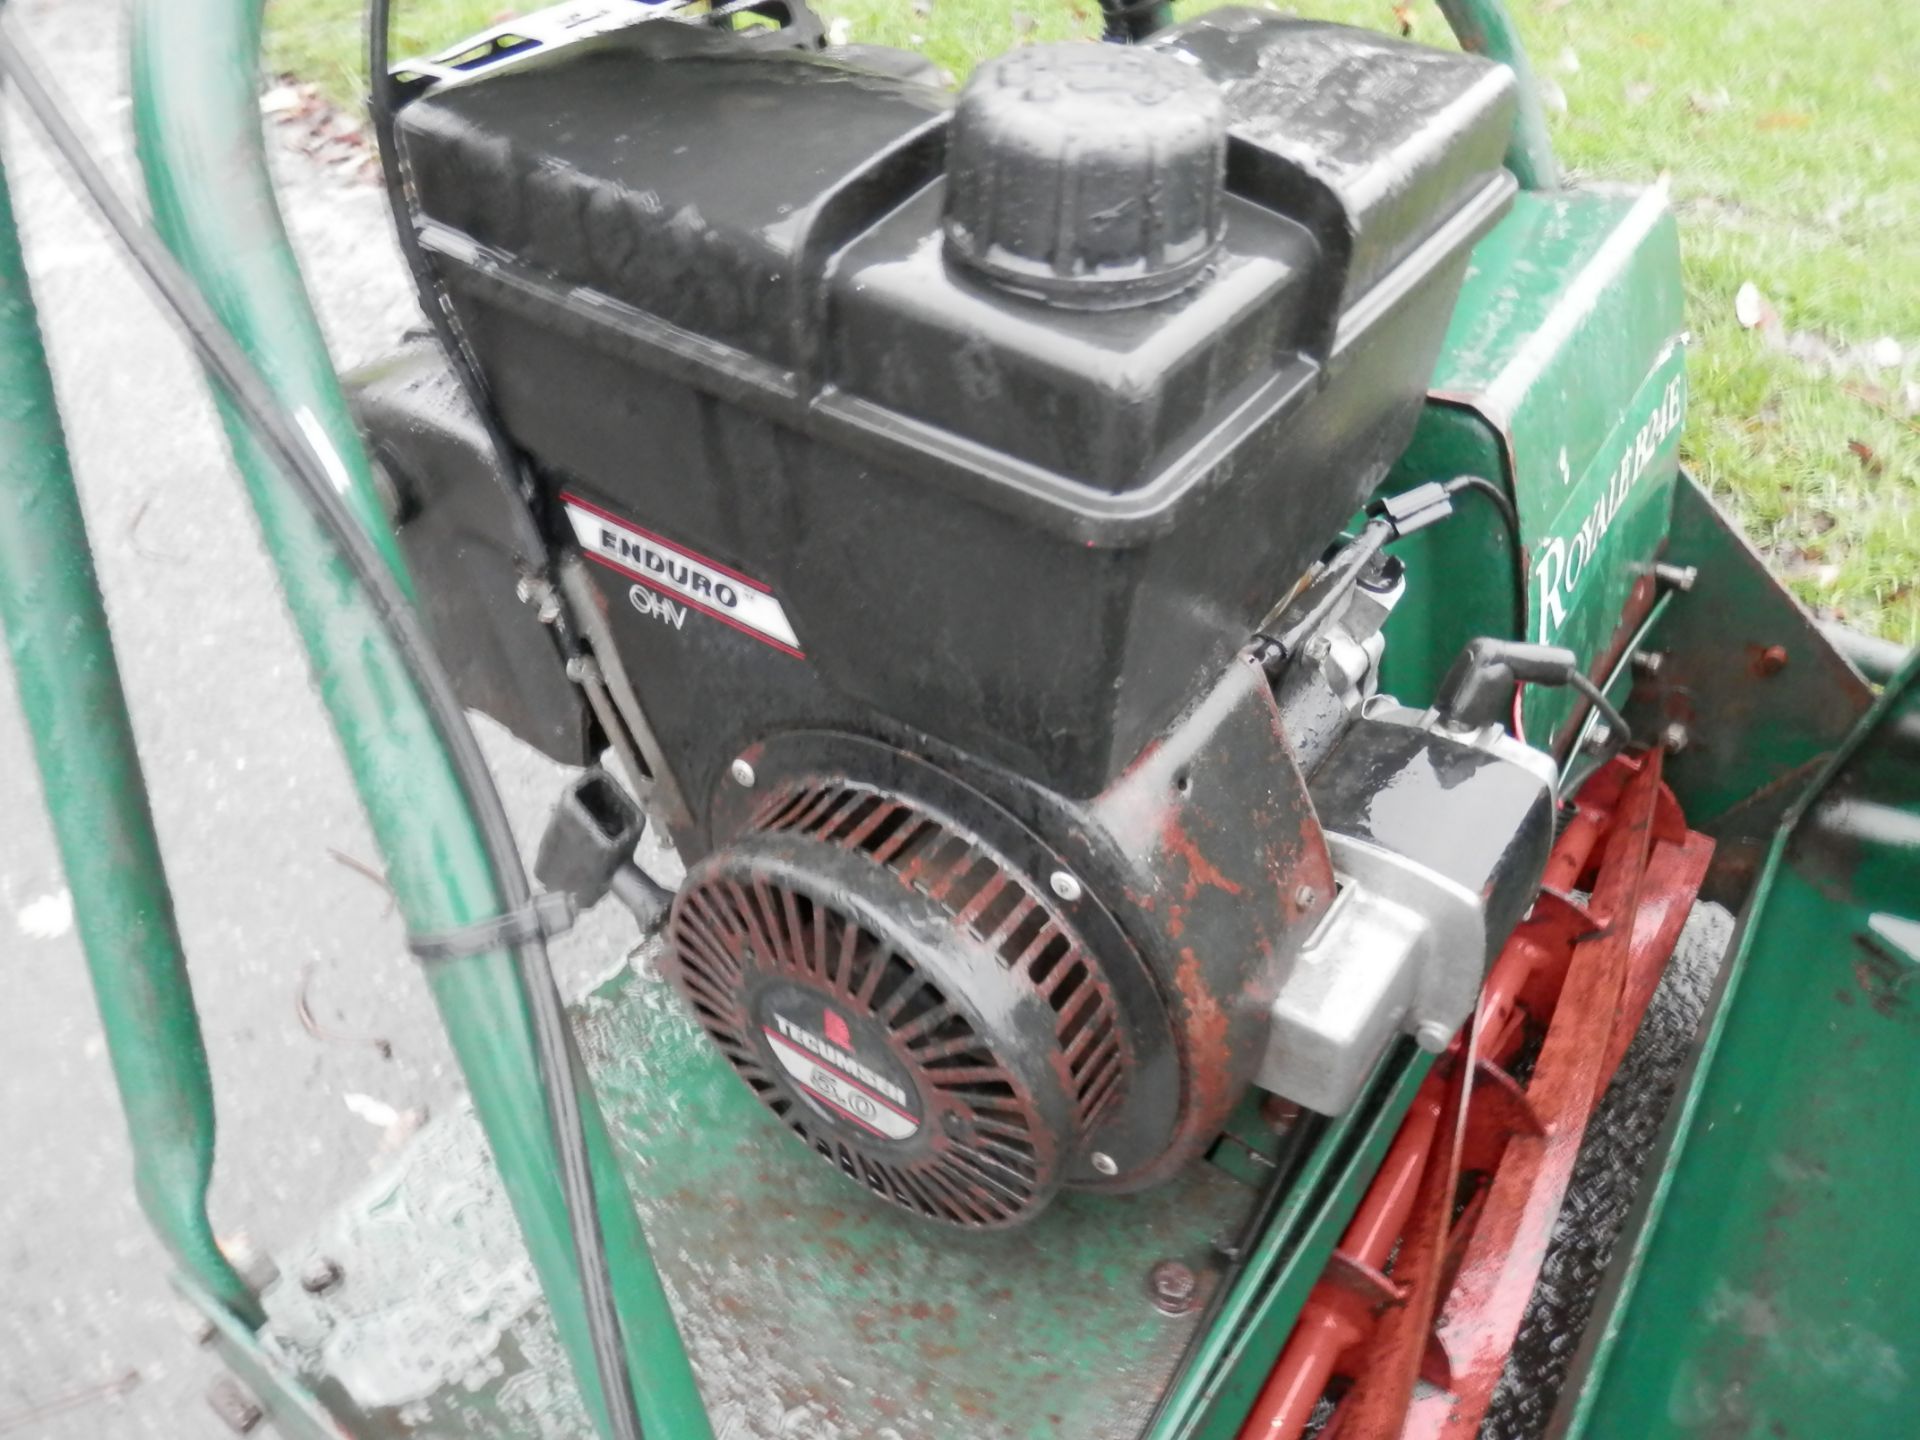 ATCO ROYALE B24E SELF PROPELLED PETROL MOWER. GOOD WORKING ORDER. - Image 7 of 8